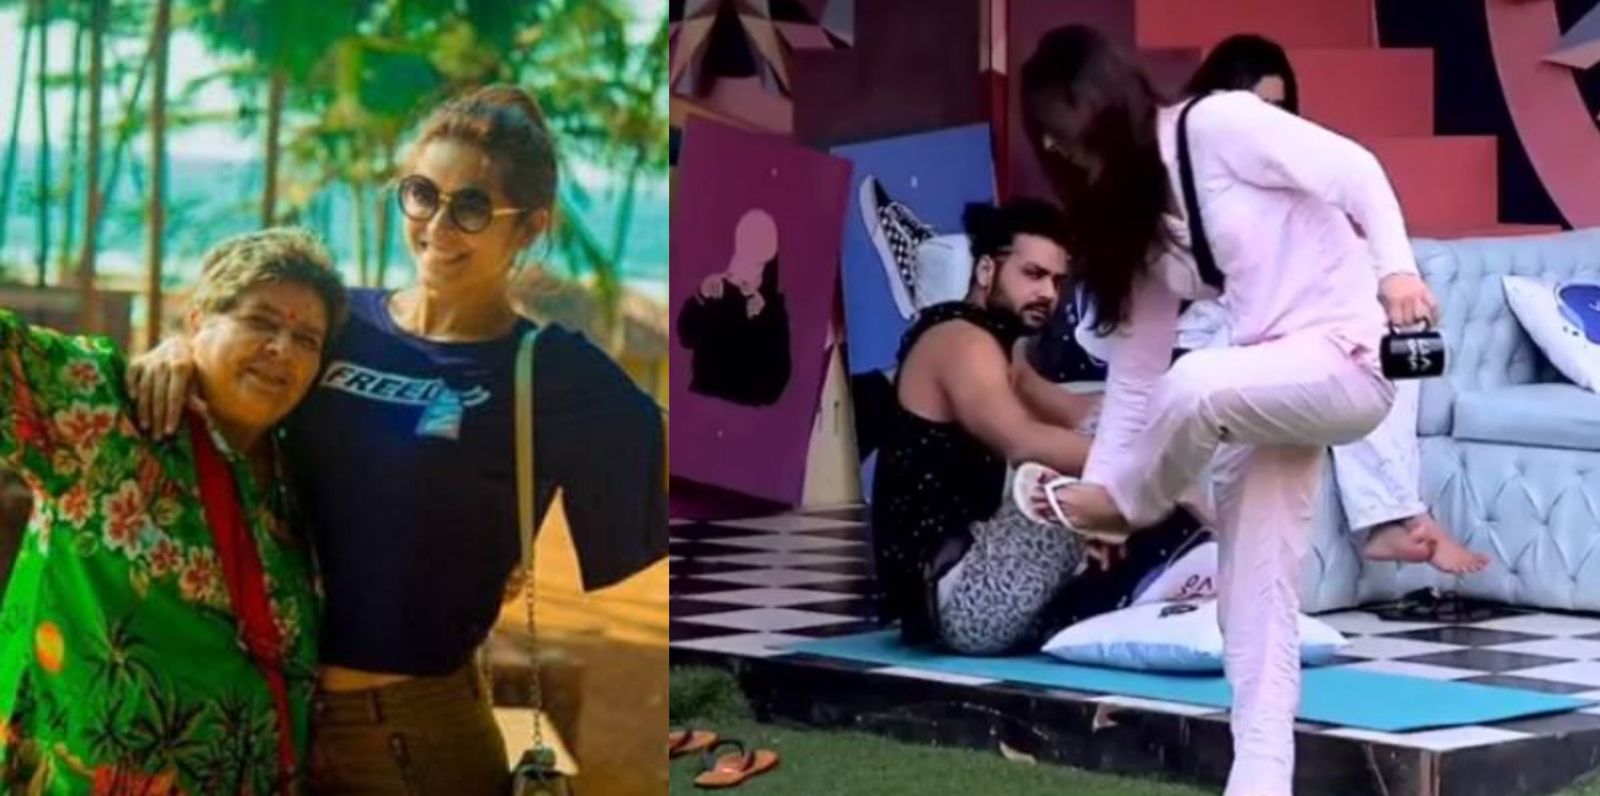 Bigg Boss 13: Madhurima Tuli’s Mother Opens Up About The ‘Chappal’ Episode, Says It Has Been ‘Highlighted For No Reason’!